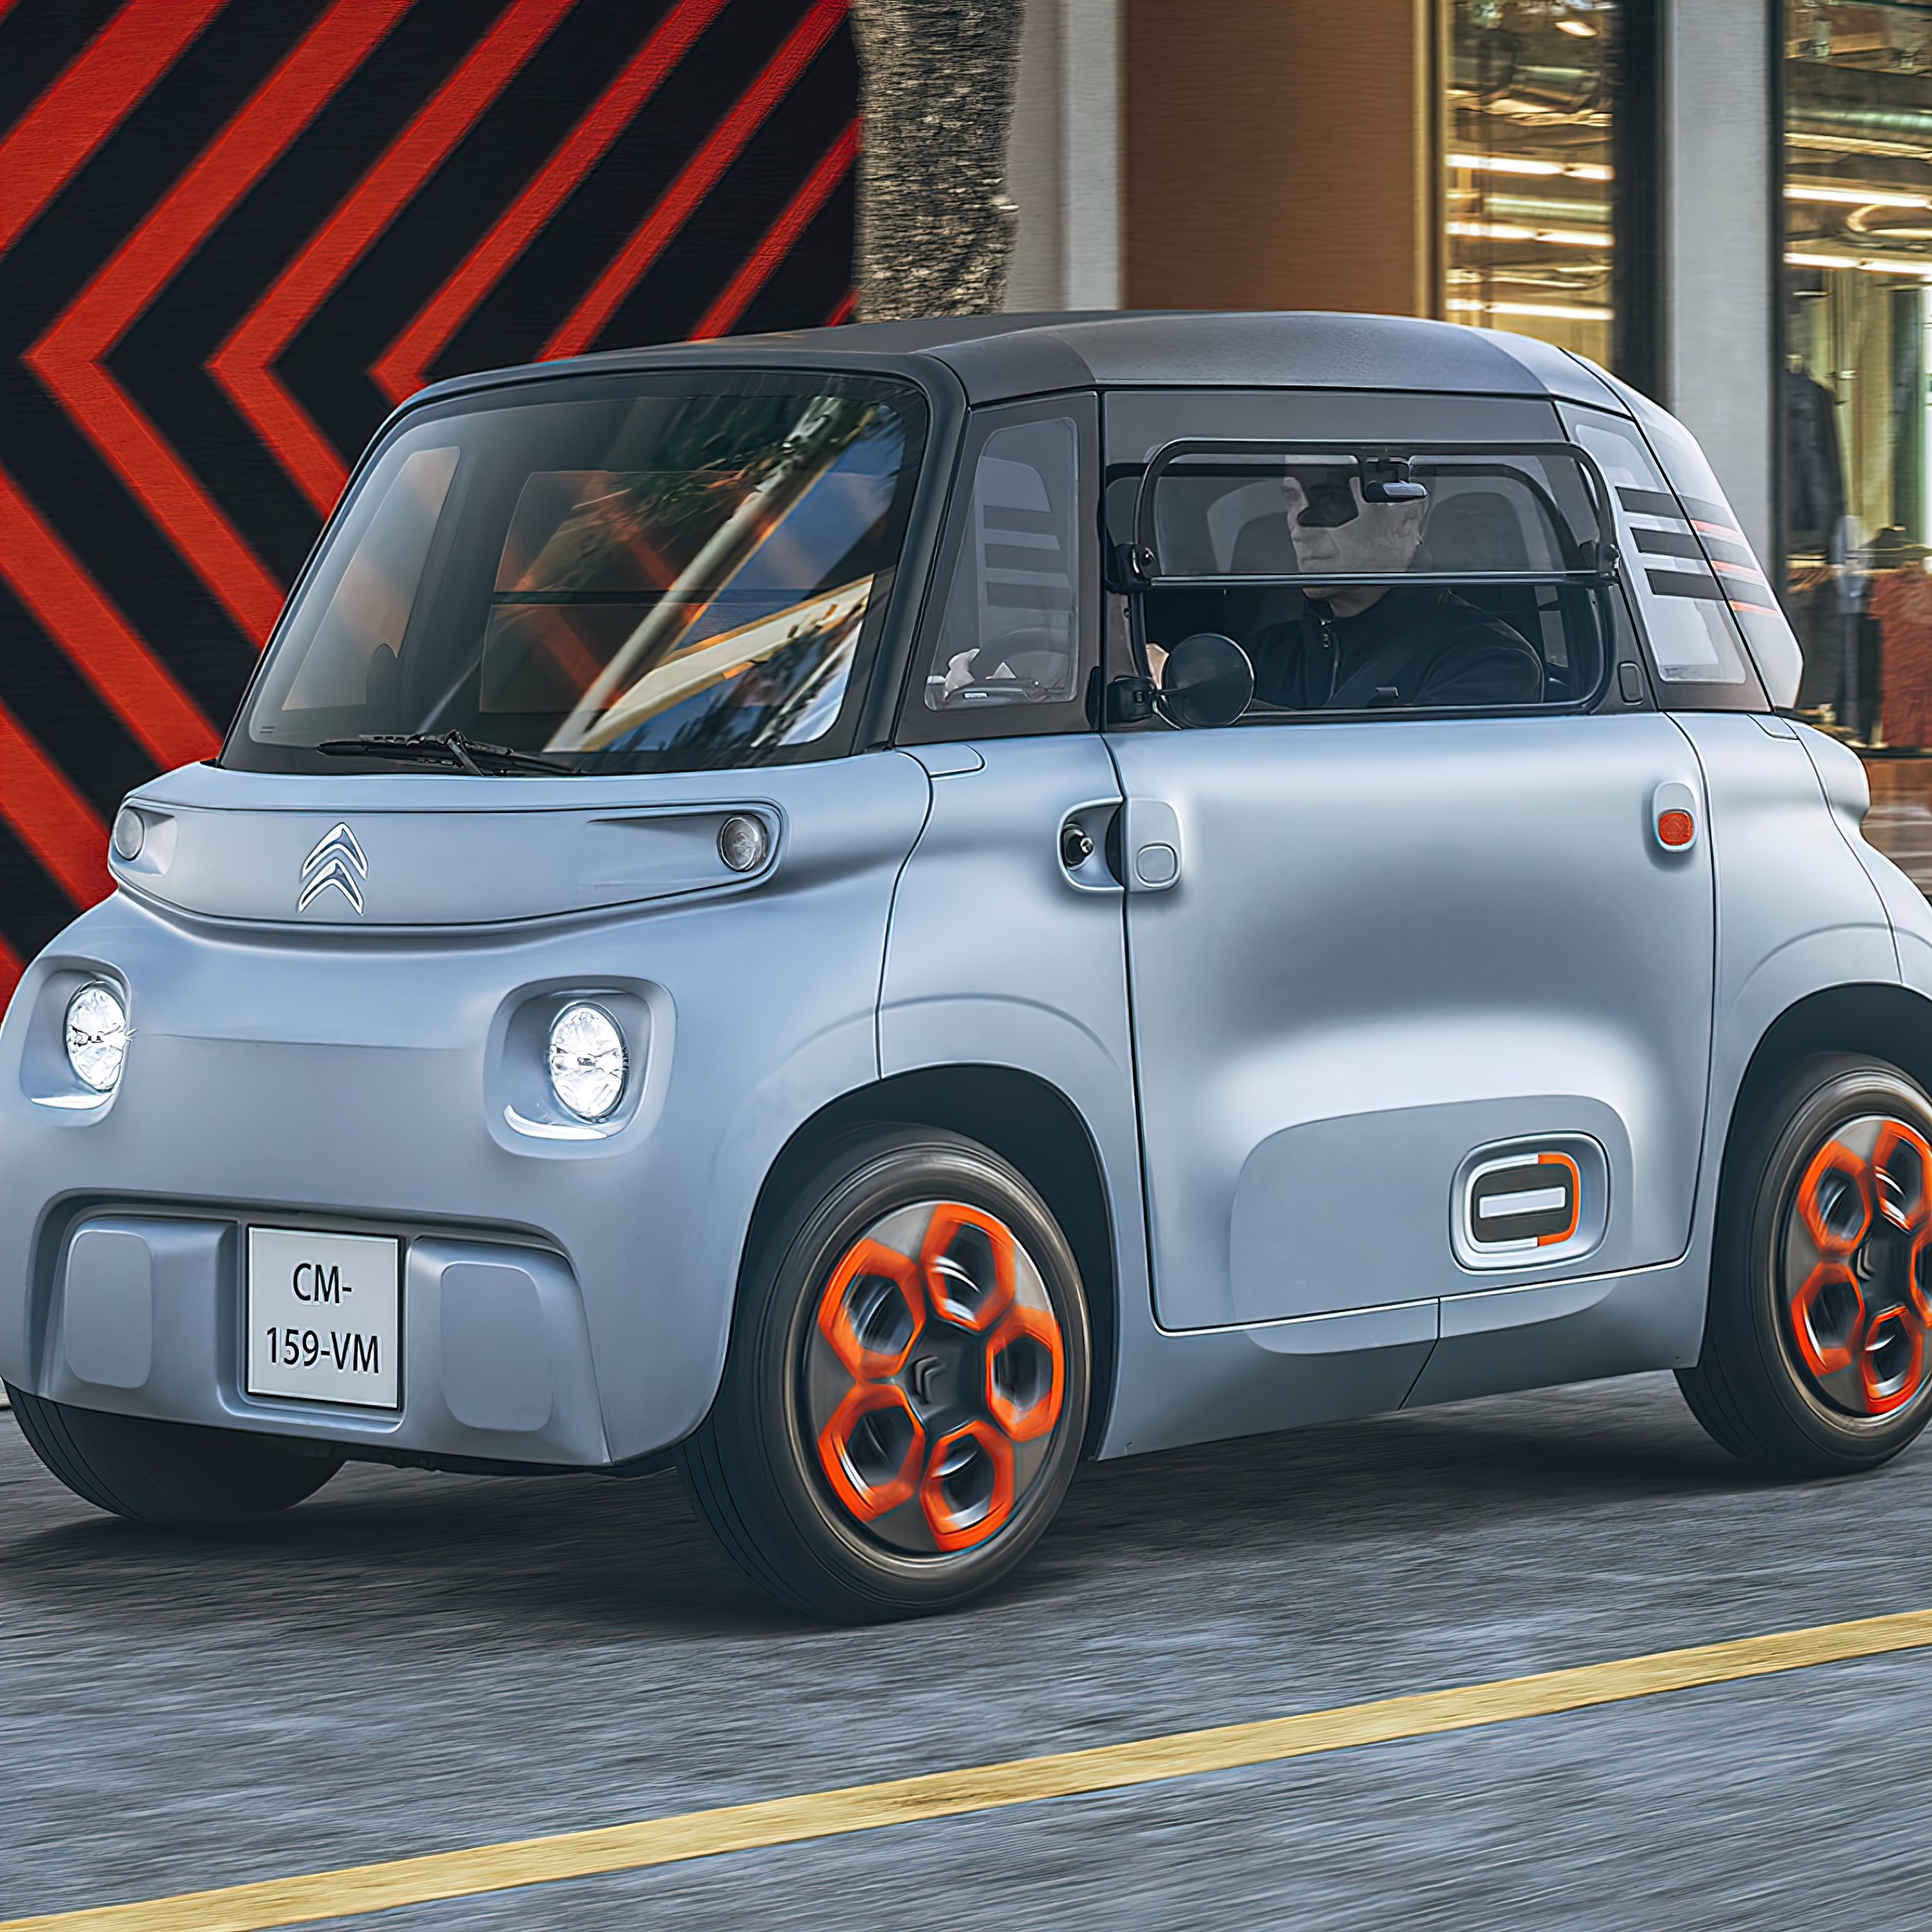  Every so often, a bizarre and unique vehicle is made into reality, and the French fellas over at Citroën have maybe done it this time with their My Ami microcar.&nbsp;&nbsp;  This is a utility reimagining of its predecessor, simply called Ami, a muc